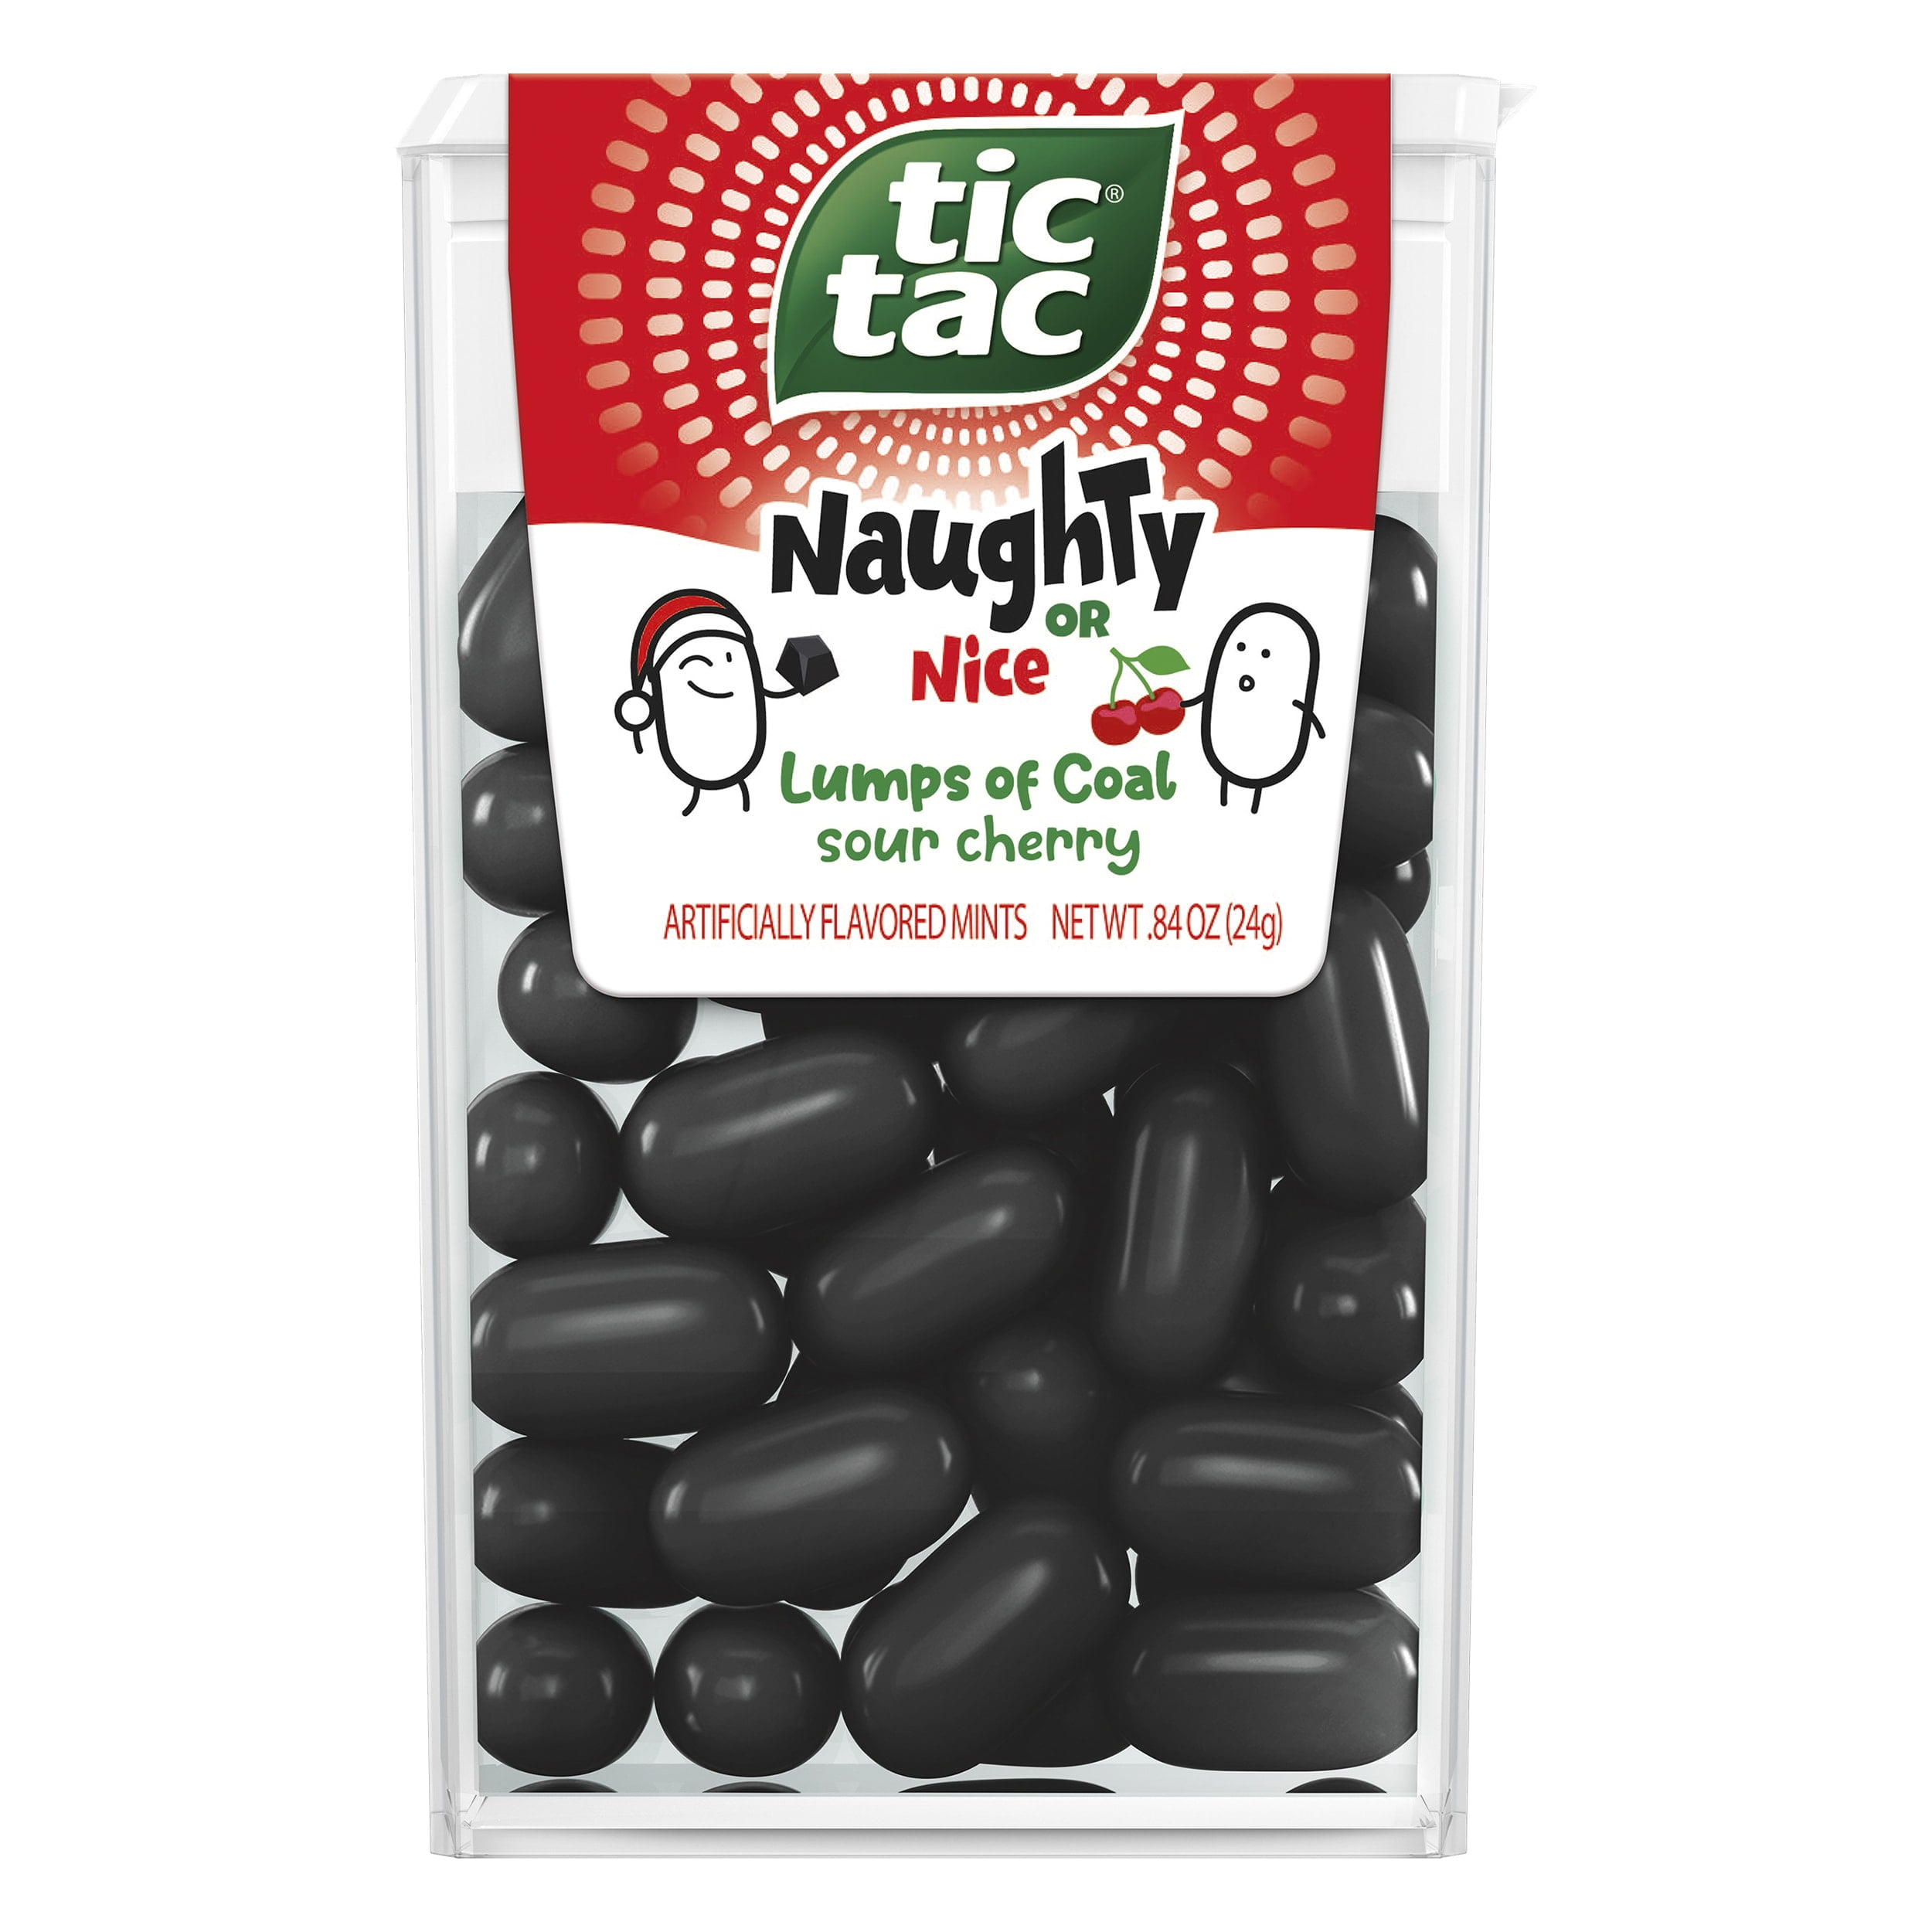 Tic Tac, Sour Cherry Mints, Naughty Or Nice Lumps Of Coal, .84 oz